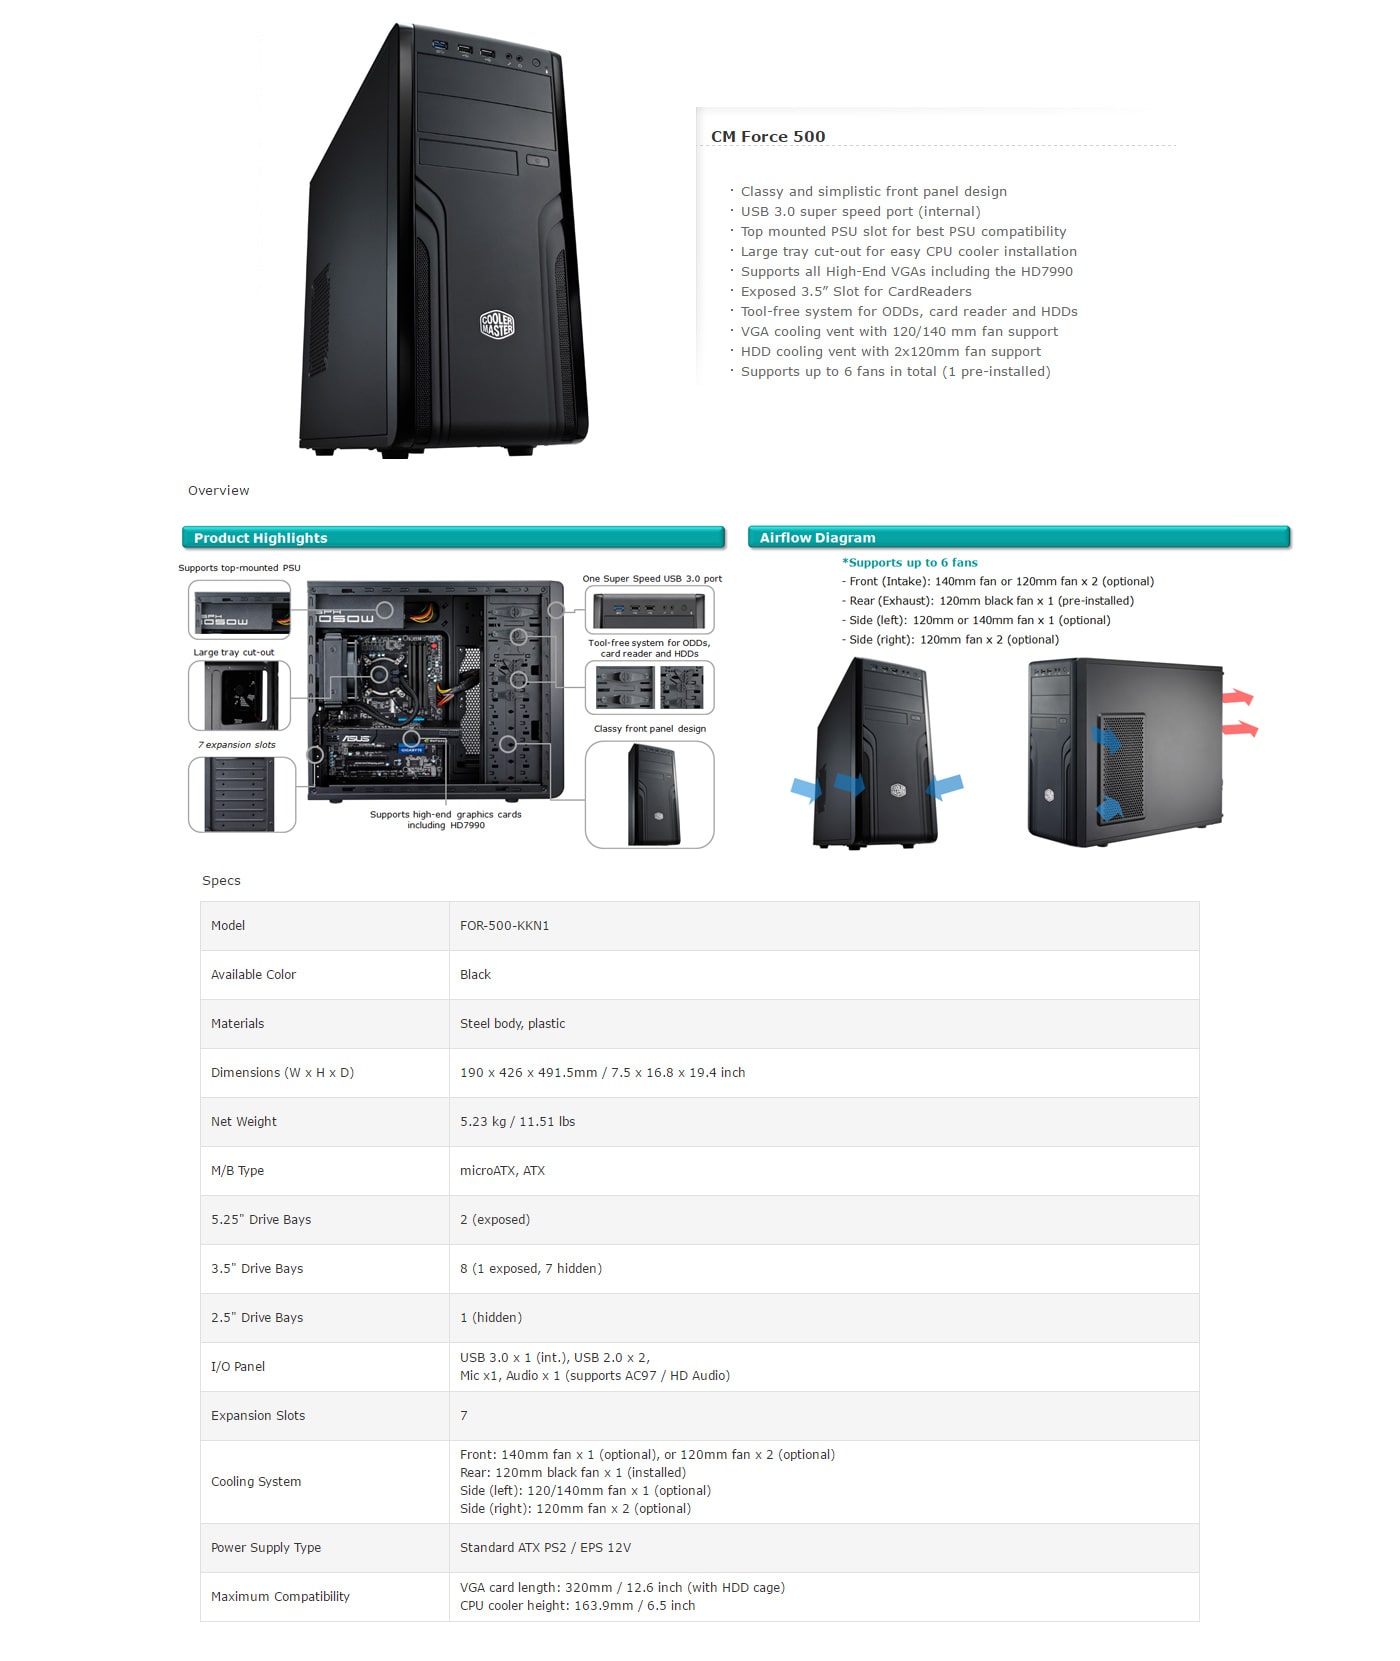 Cooler Master Force 500 ATX Mid Tower Computer features